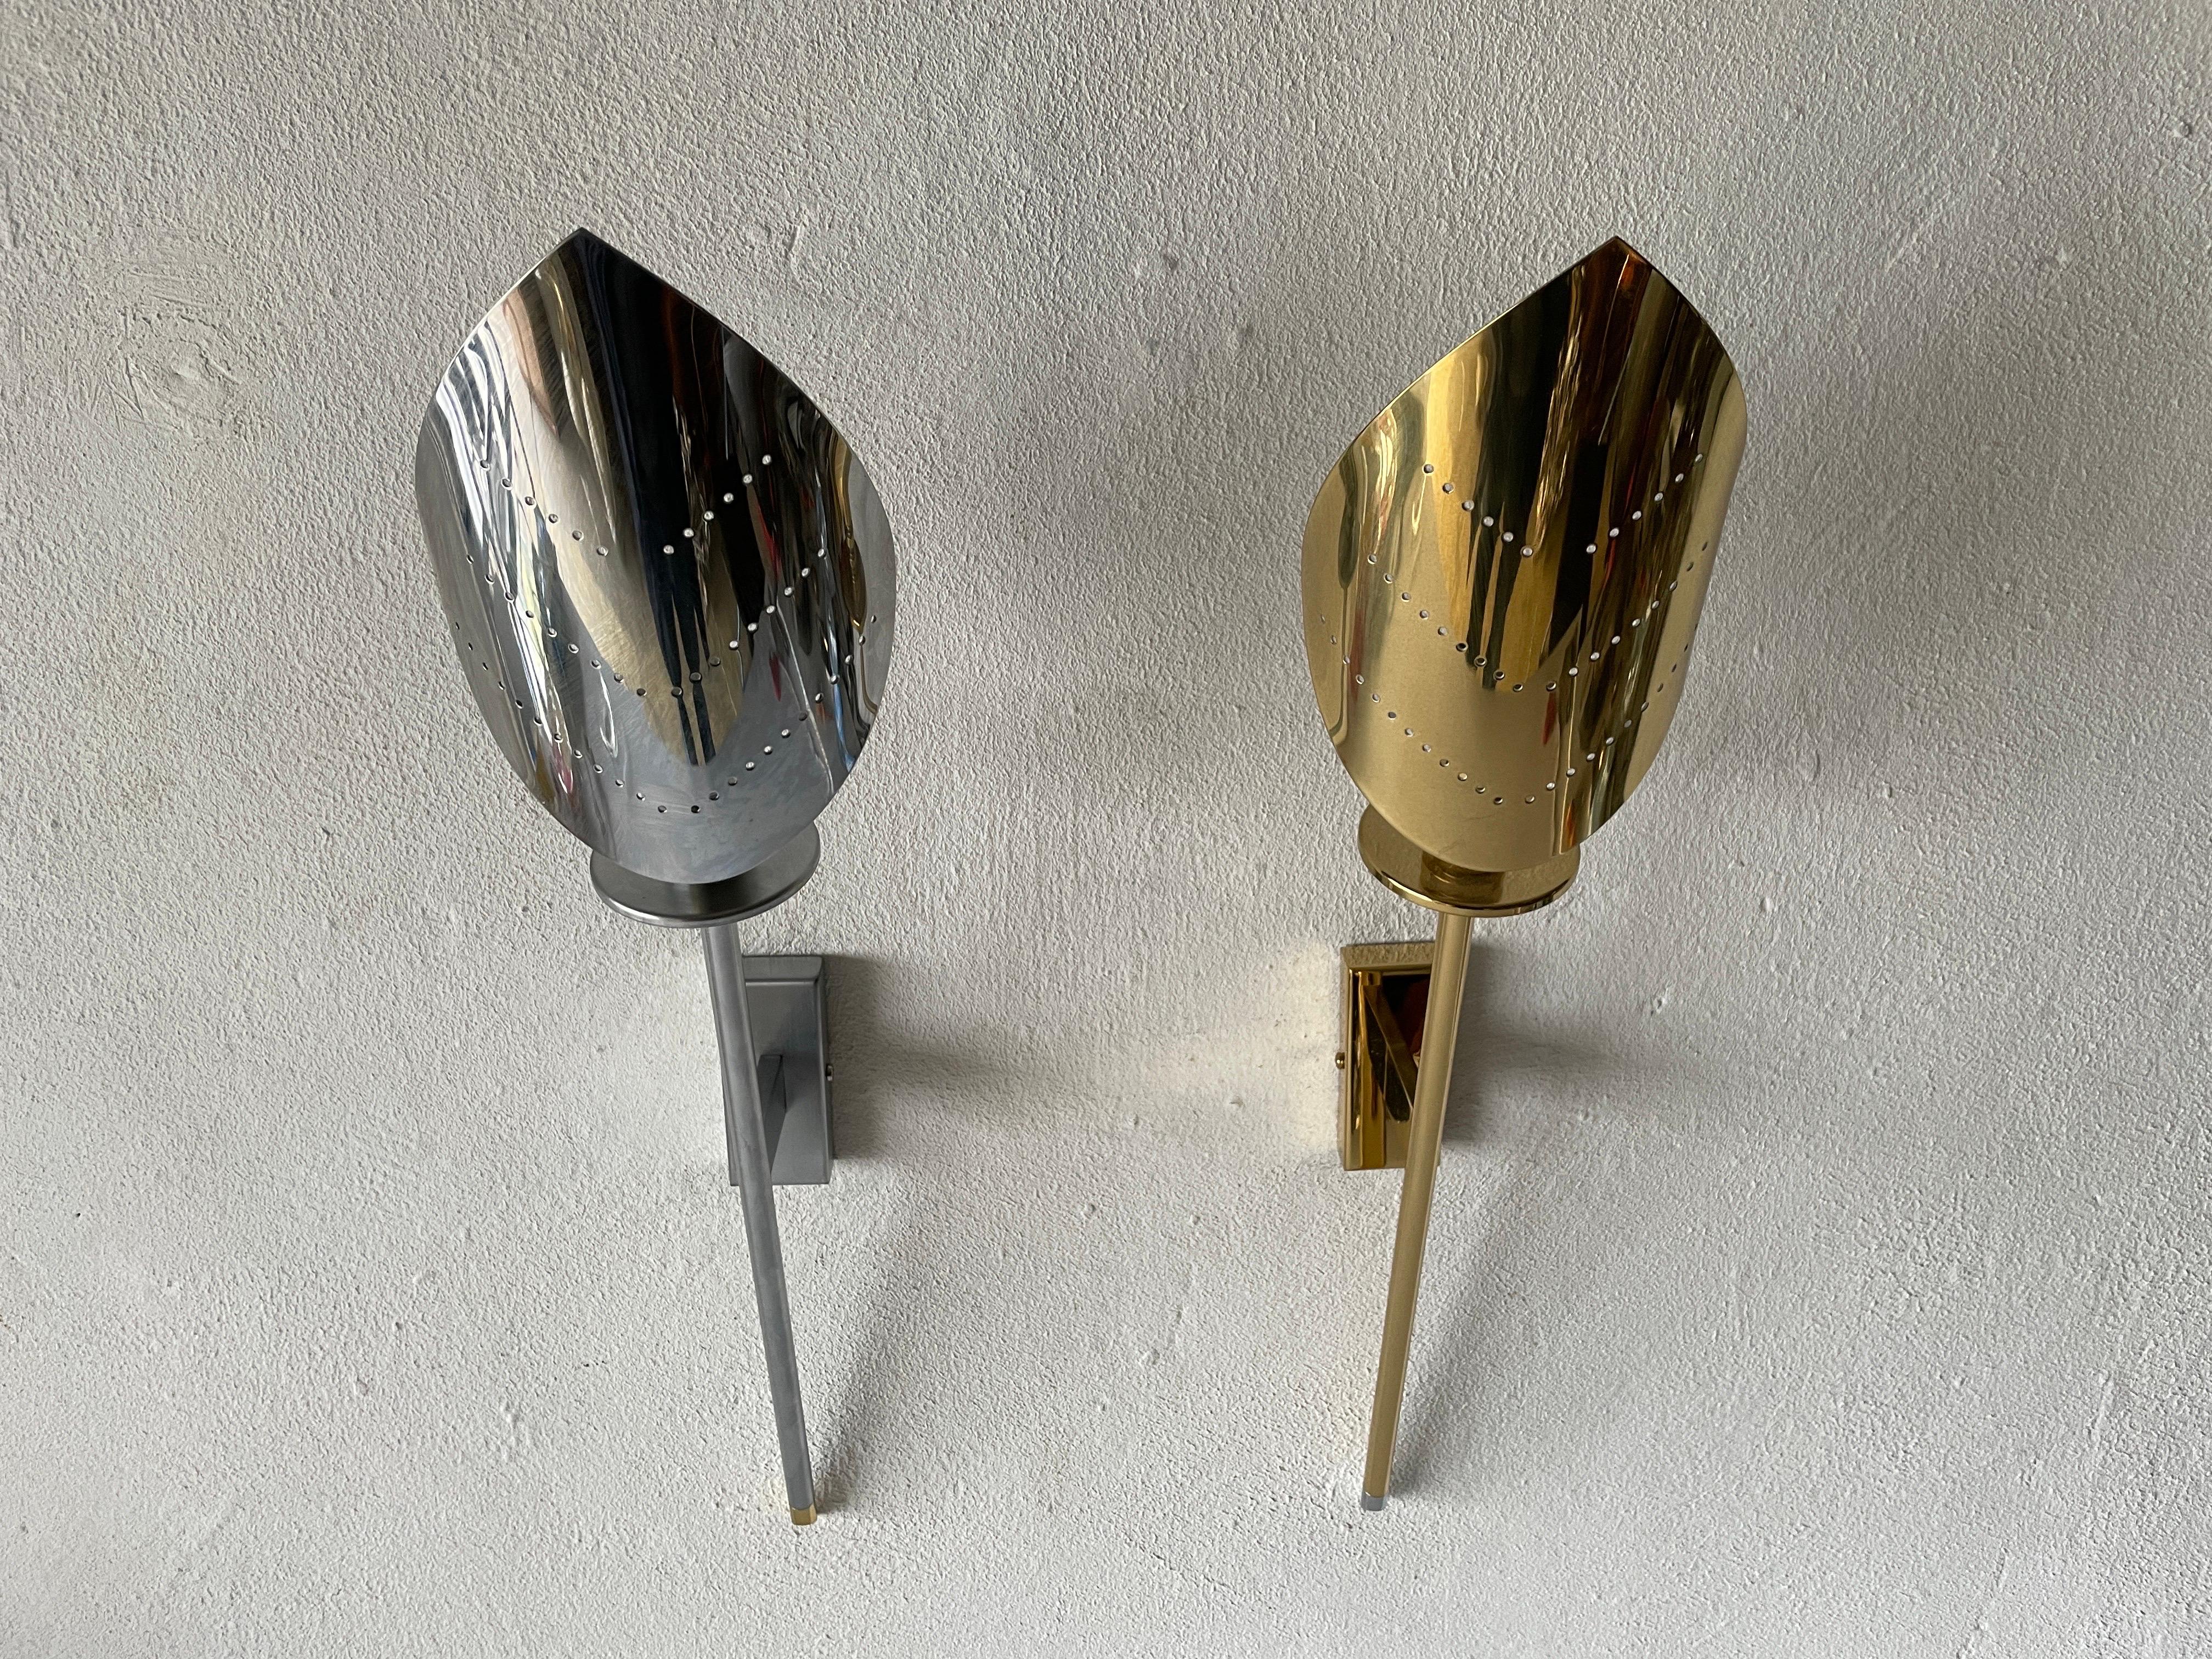 Leaf Shaped Gold and Chrome Pair of Sconces by Baulmann Leuchten, 1980s, Germany

Very nice high quality wall lamps.

Lamps are in very good vintage condition.

These lamps works with E14 standard light bulbs. 
Wired and suitable to use in